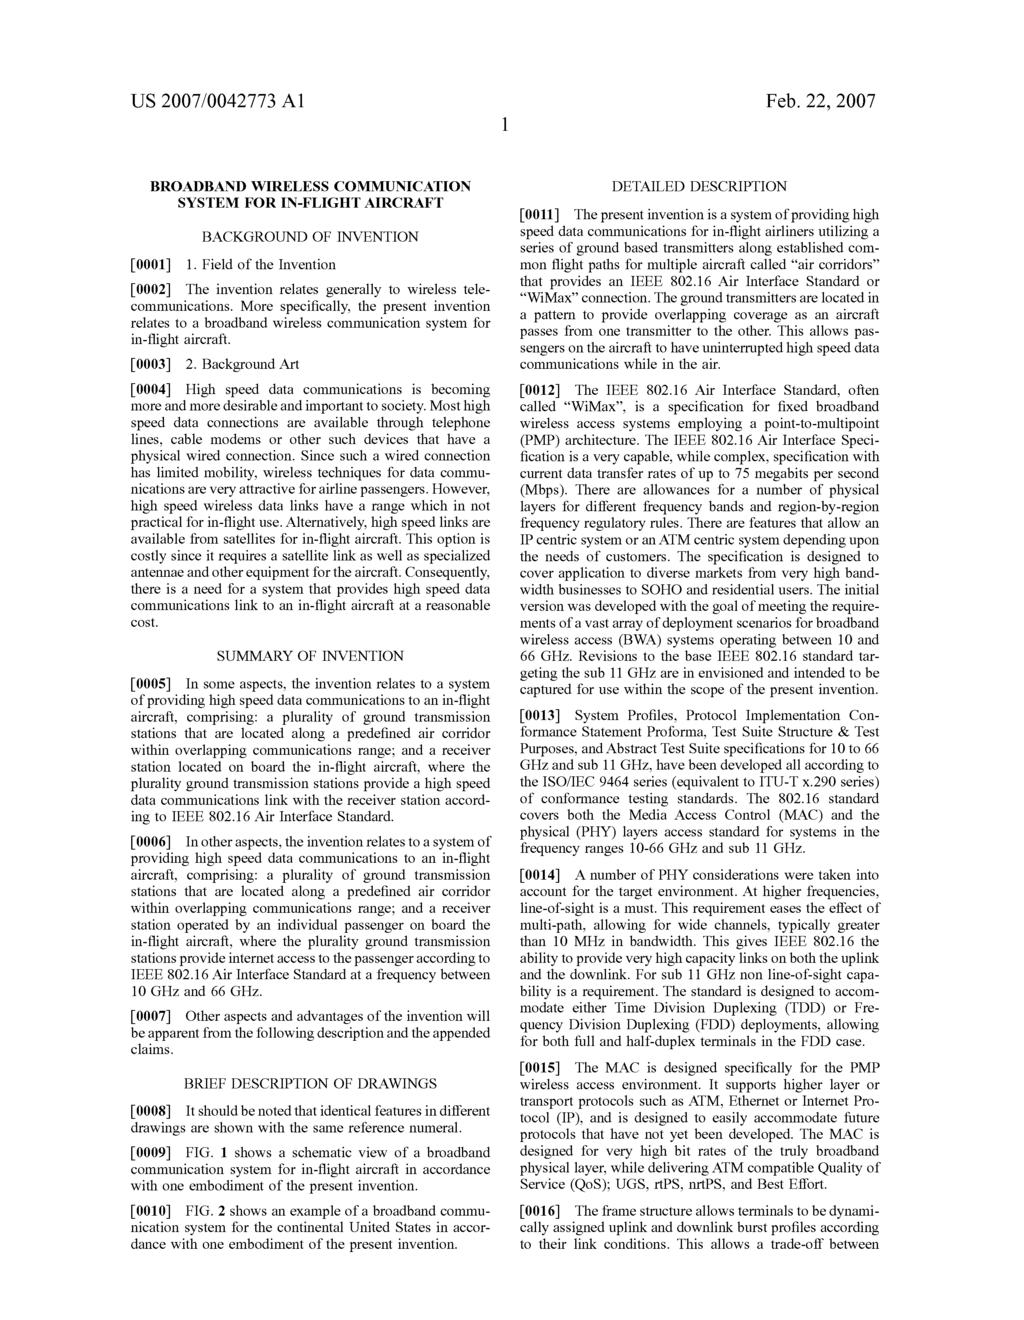 US 2007/0042773 A1 Feb. 22, 2007 BROADBAND WIRELESS COMMUNICATION SYSTEM FOR IN-FLIGHT AIRCRAFT BACKGROUND OF INVENTION 0001) 1.